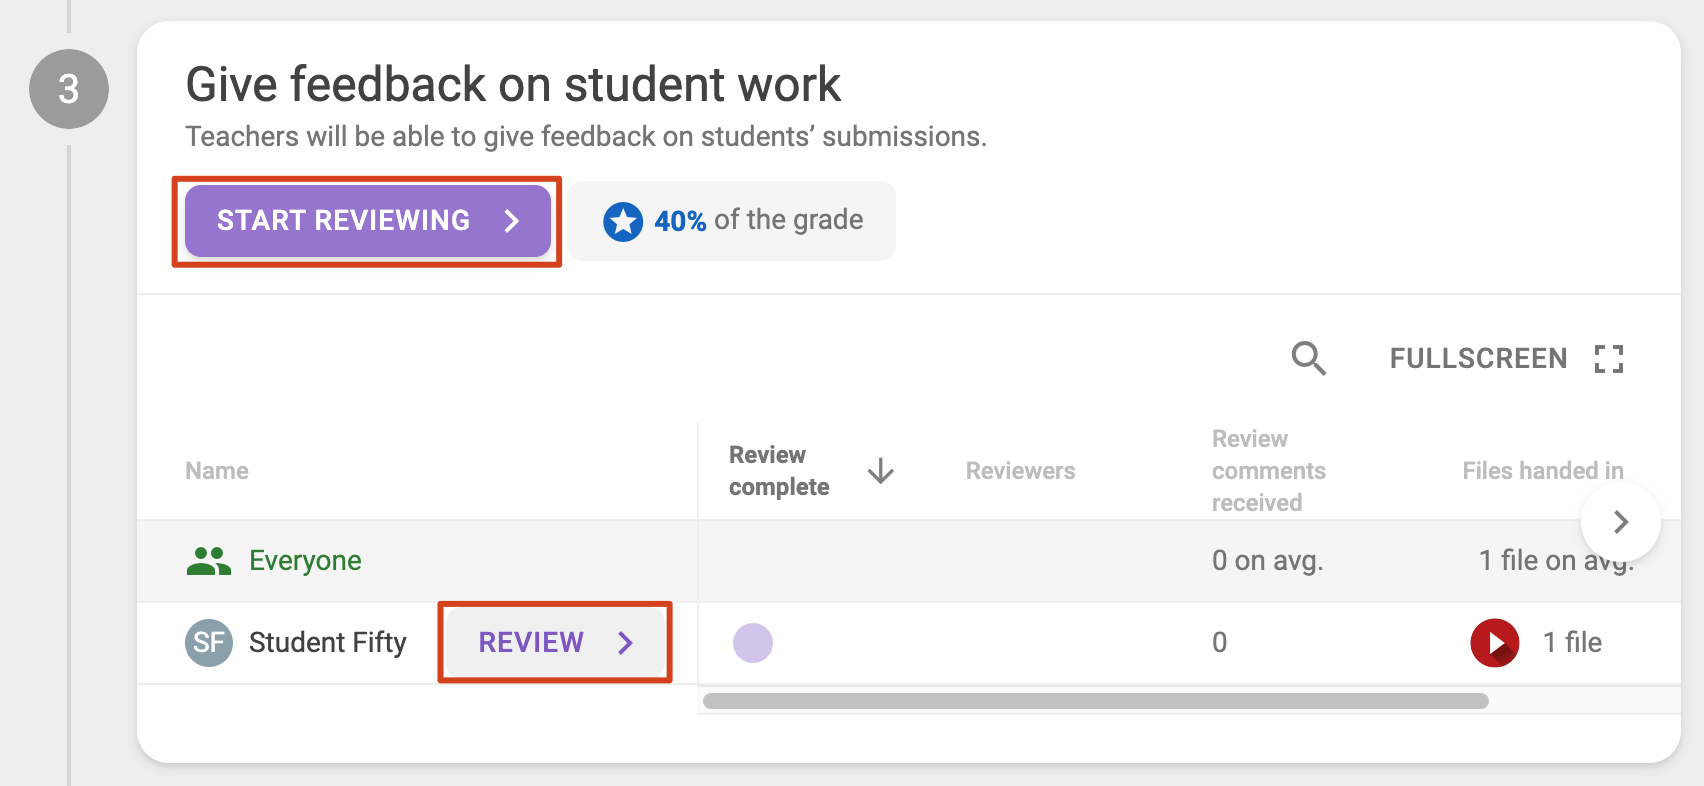 The third step in the FeedbackFruits activity is titled “Give Feedback on Student Work”